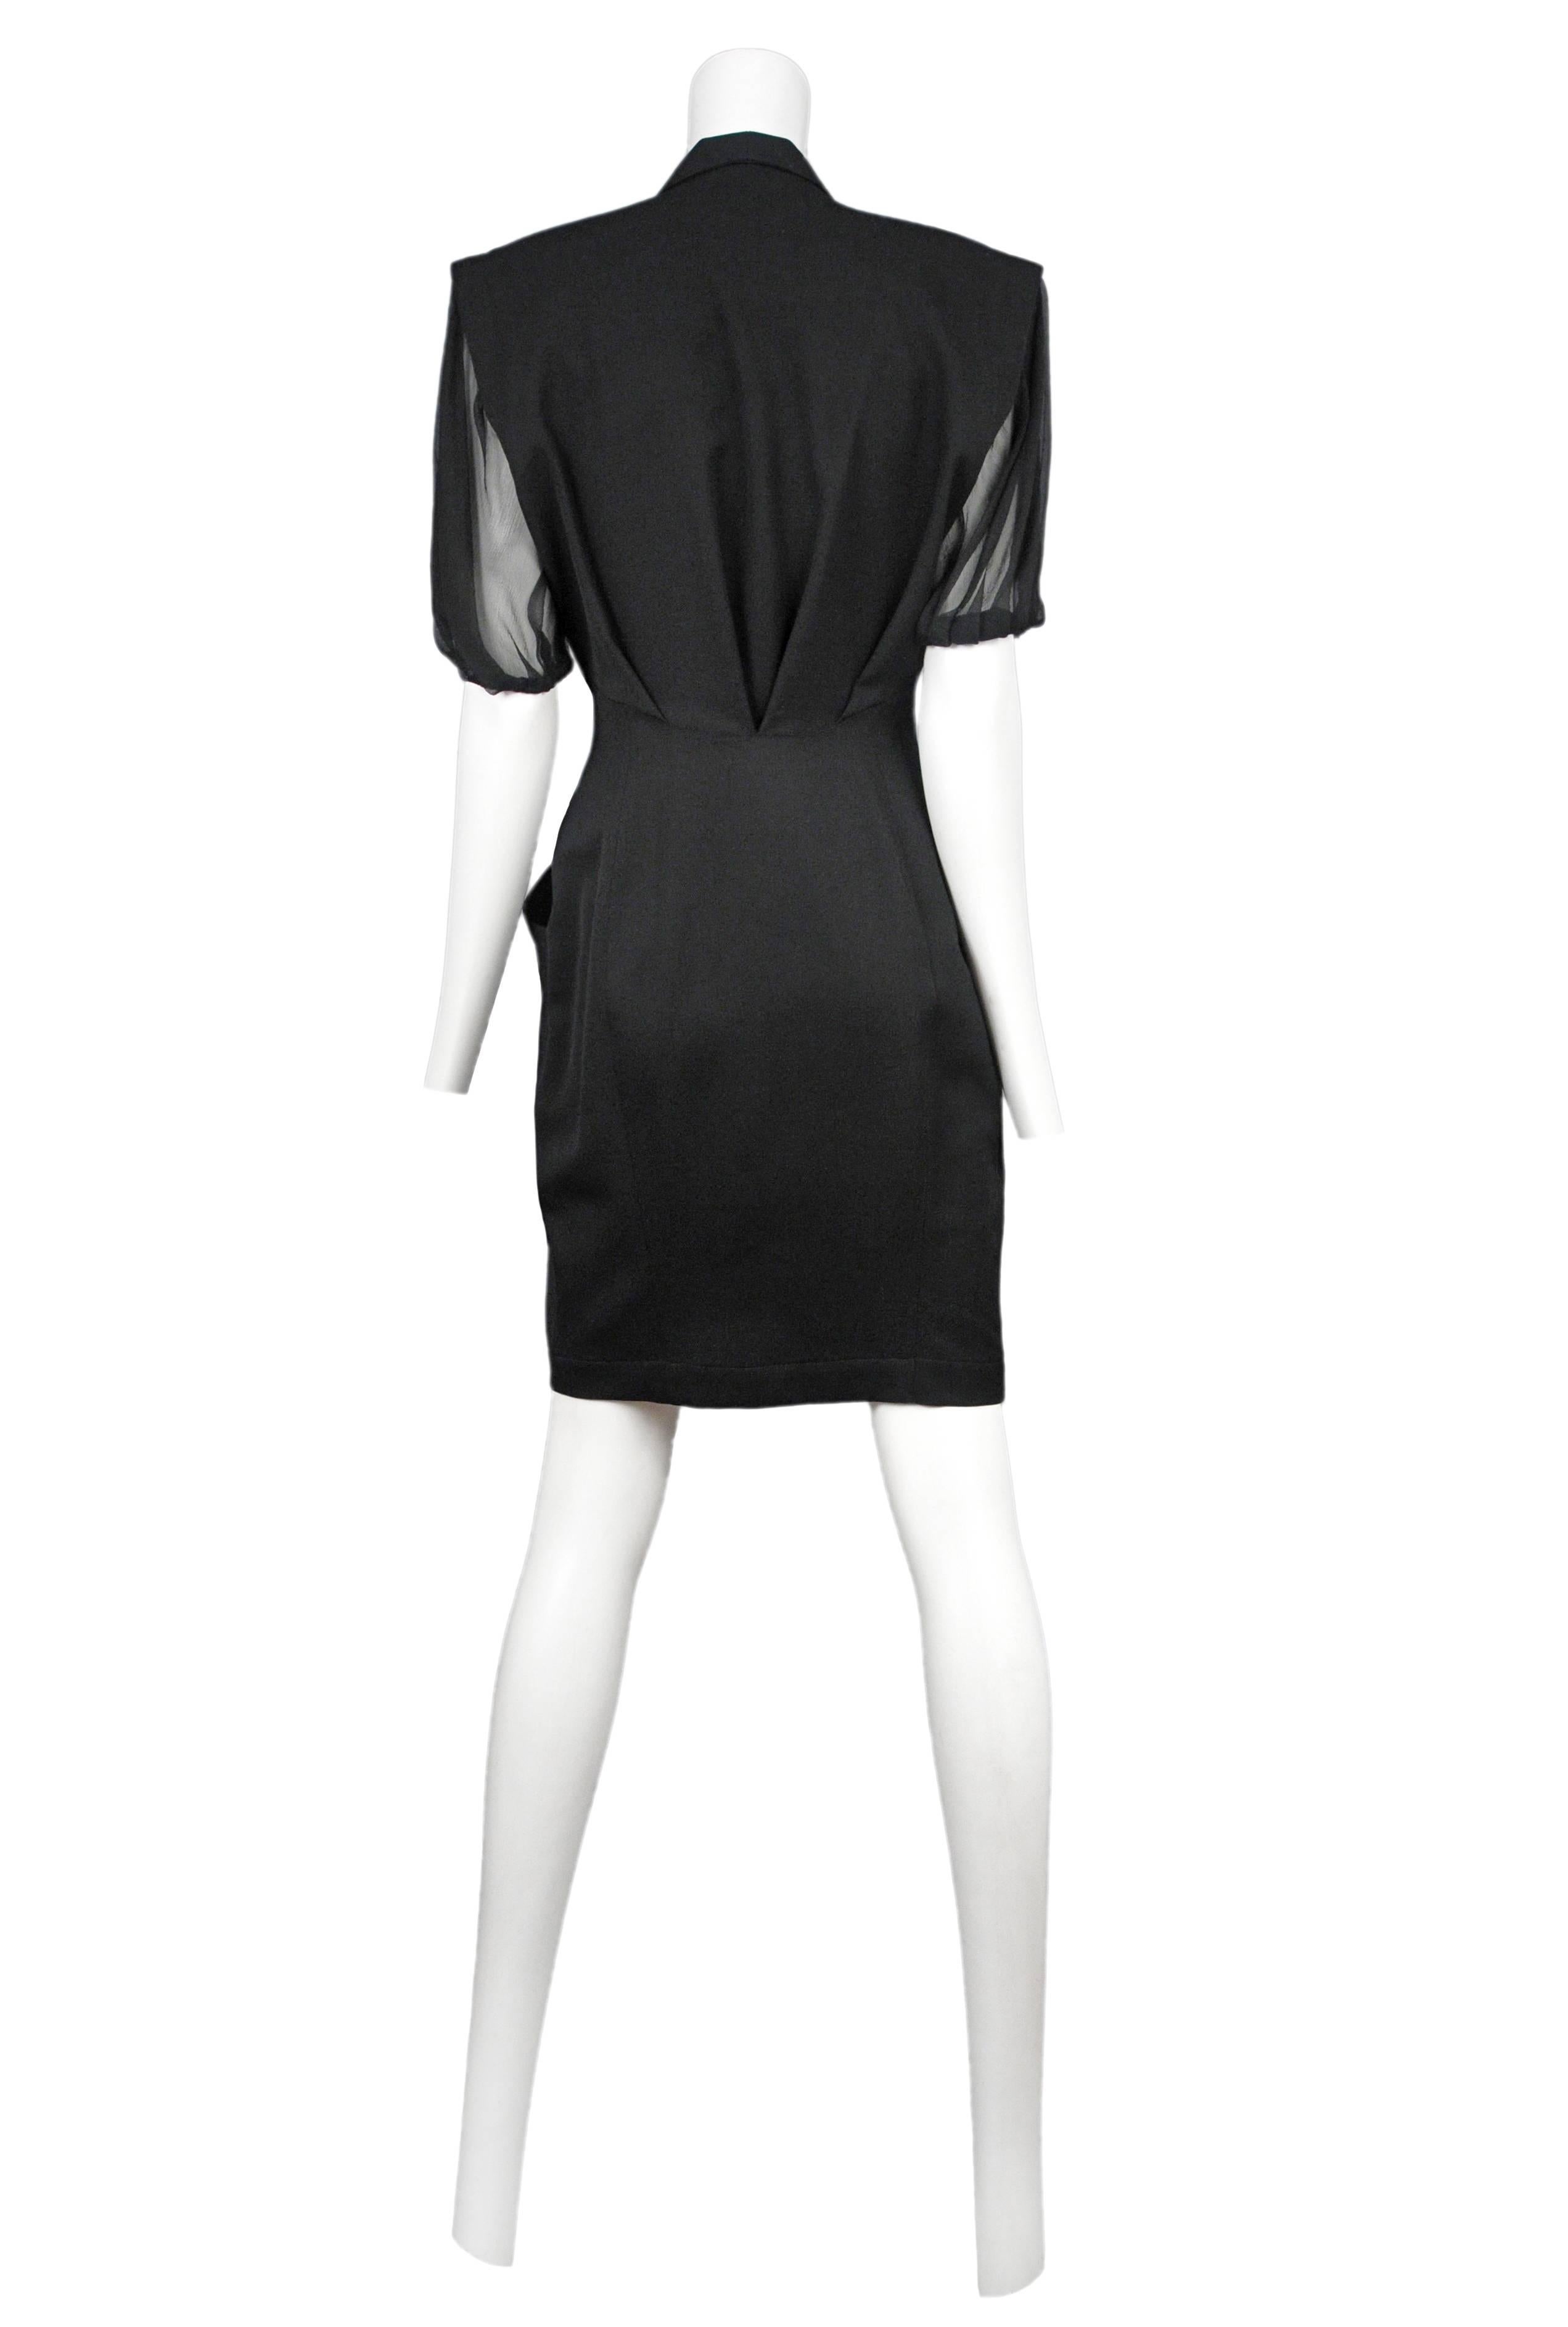 Thierry Mugler black chiffon structured dress with chiffon insets. Dress has deep pockets in front and plunging neckline. 